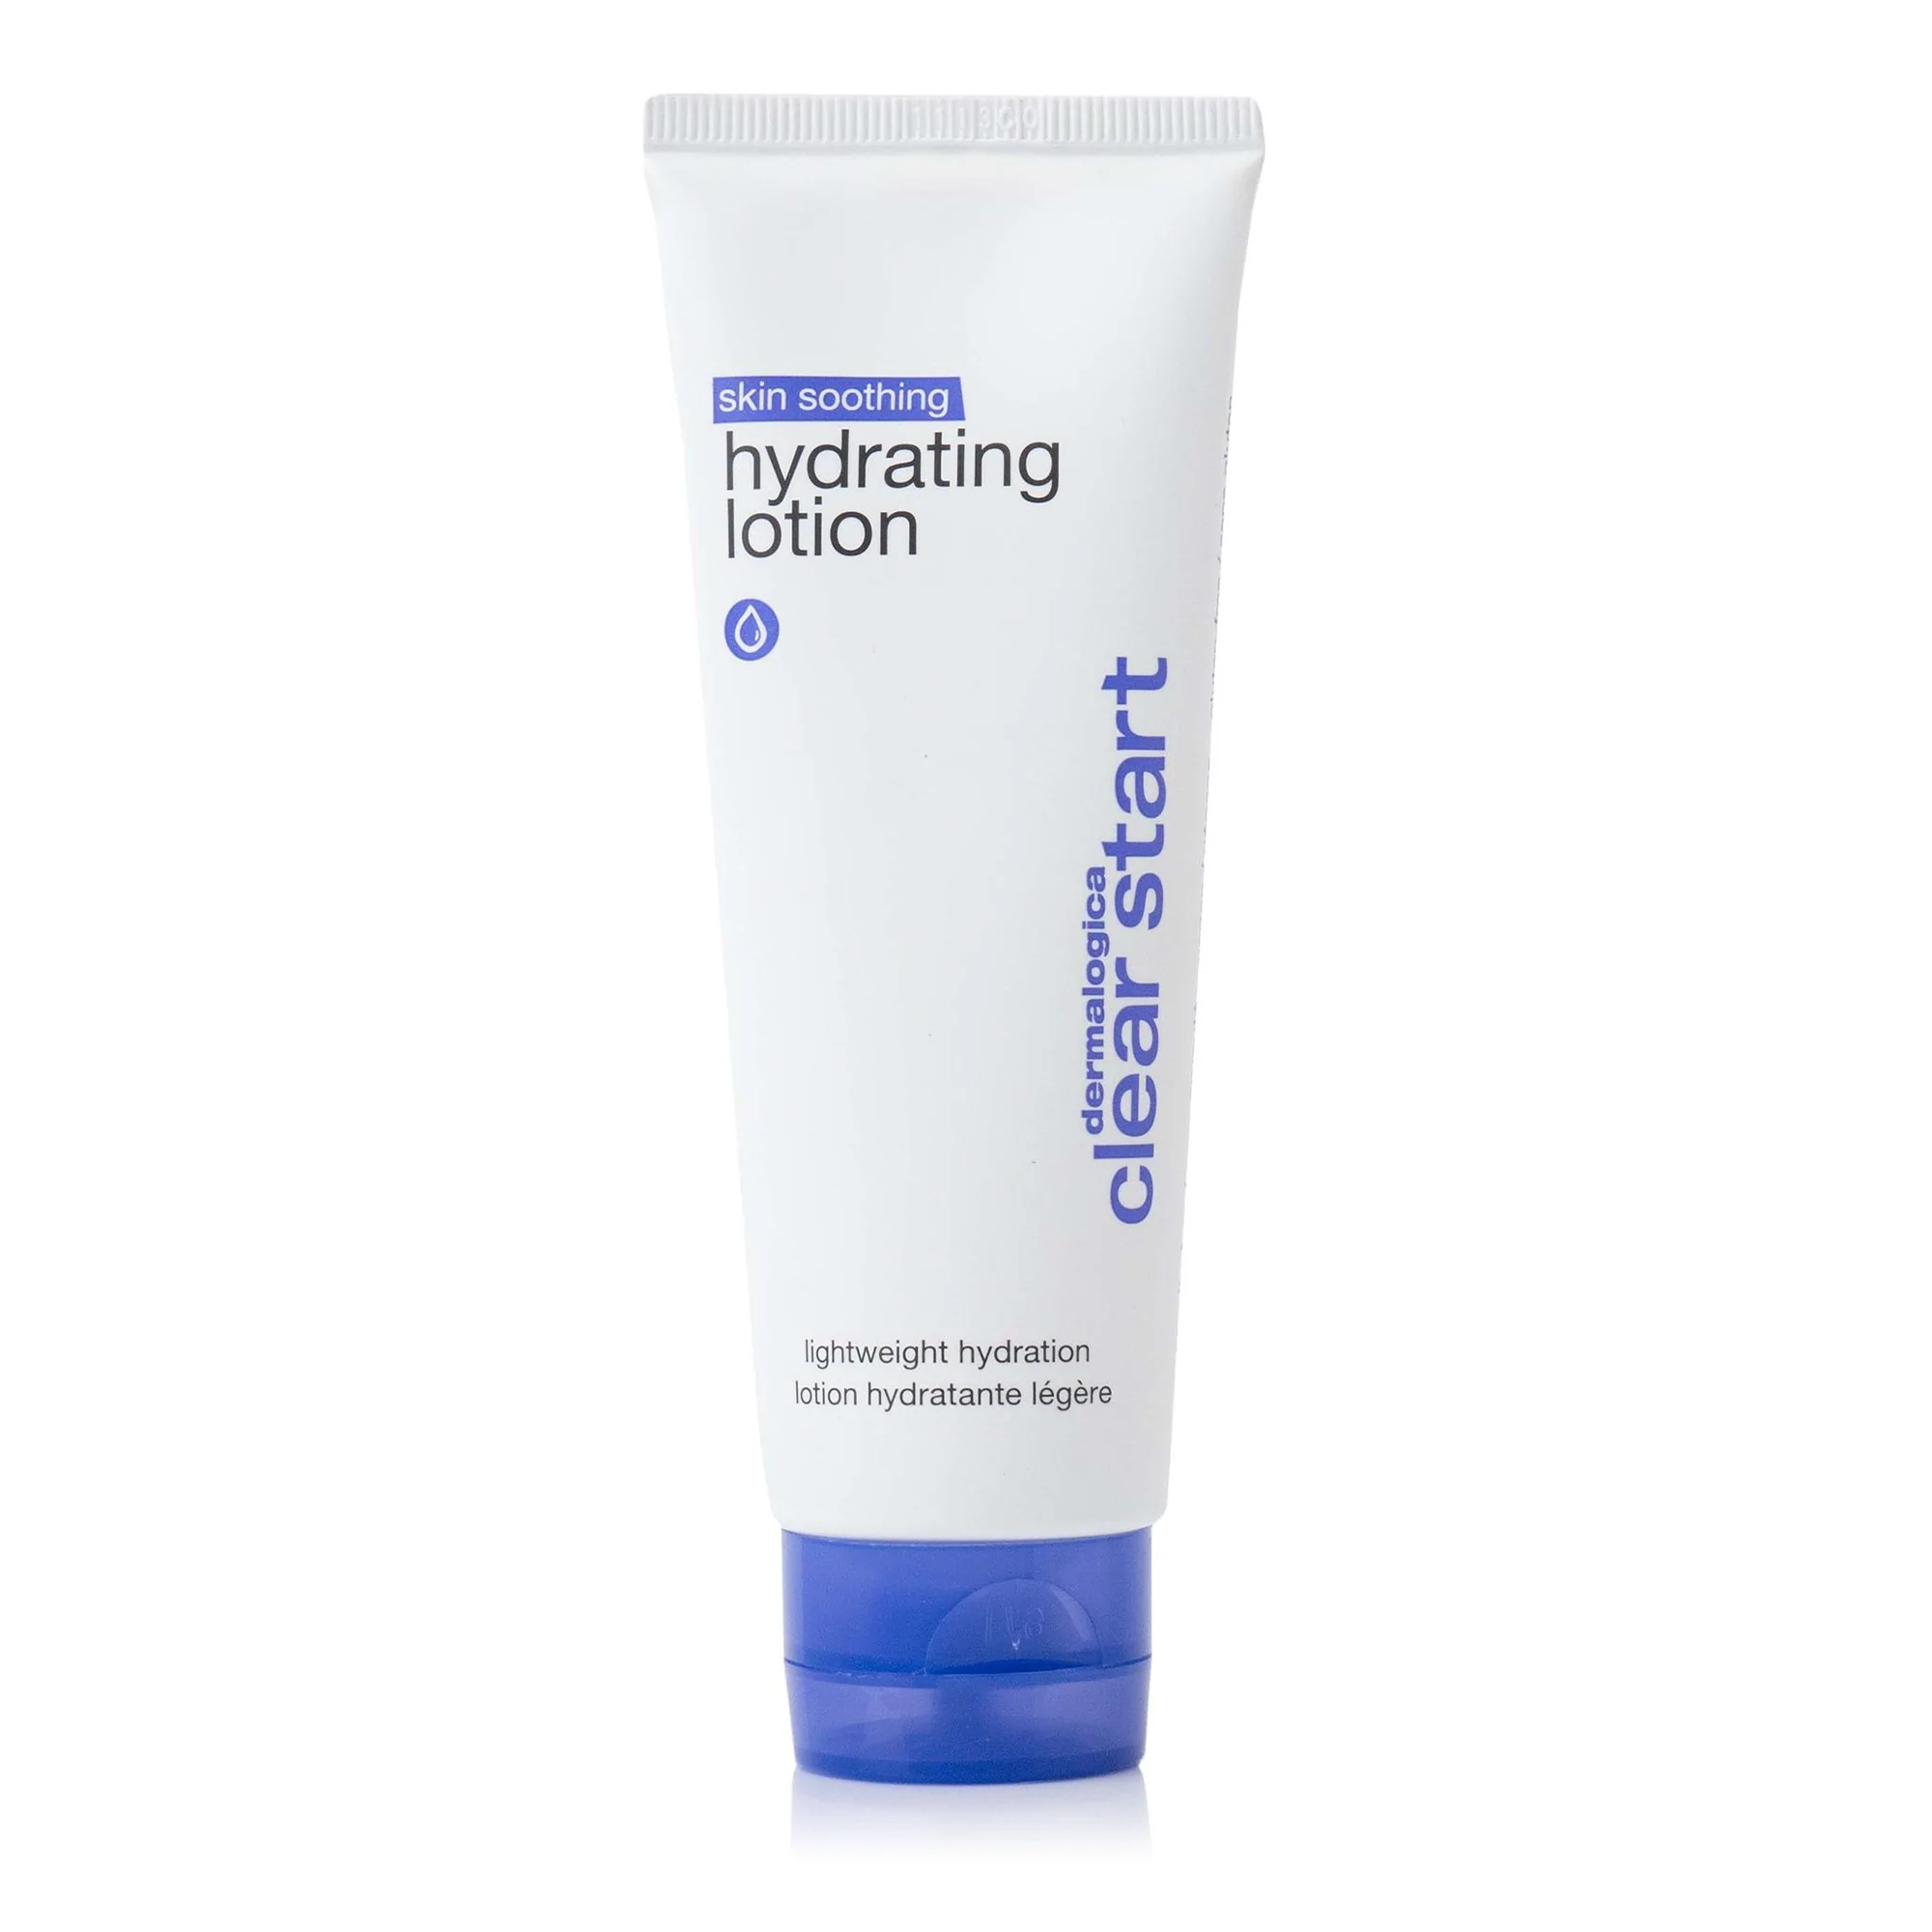 Dermalogica Clear Start Skin Soothing Hydrating Lotion / 2OZ